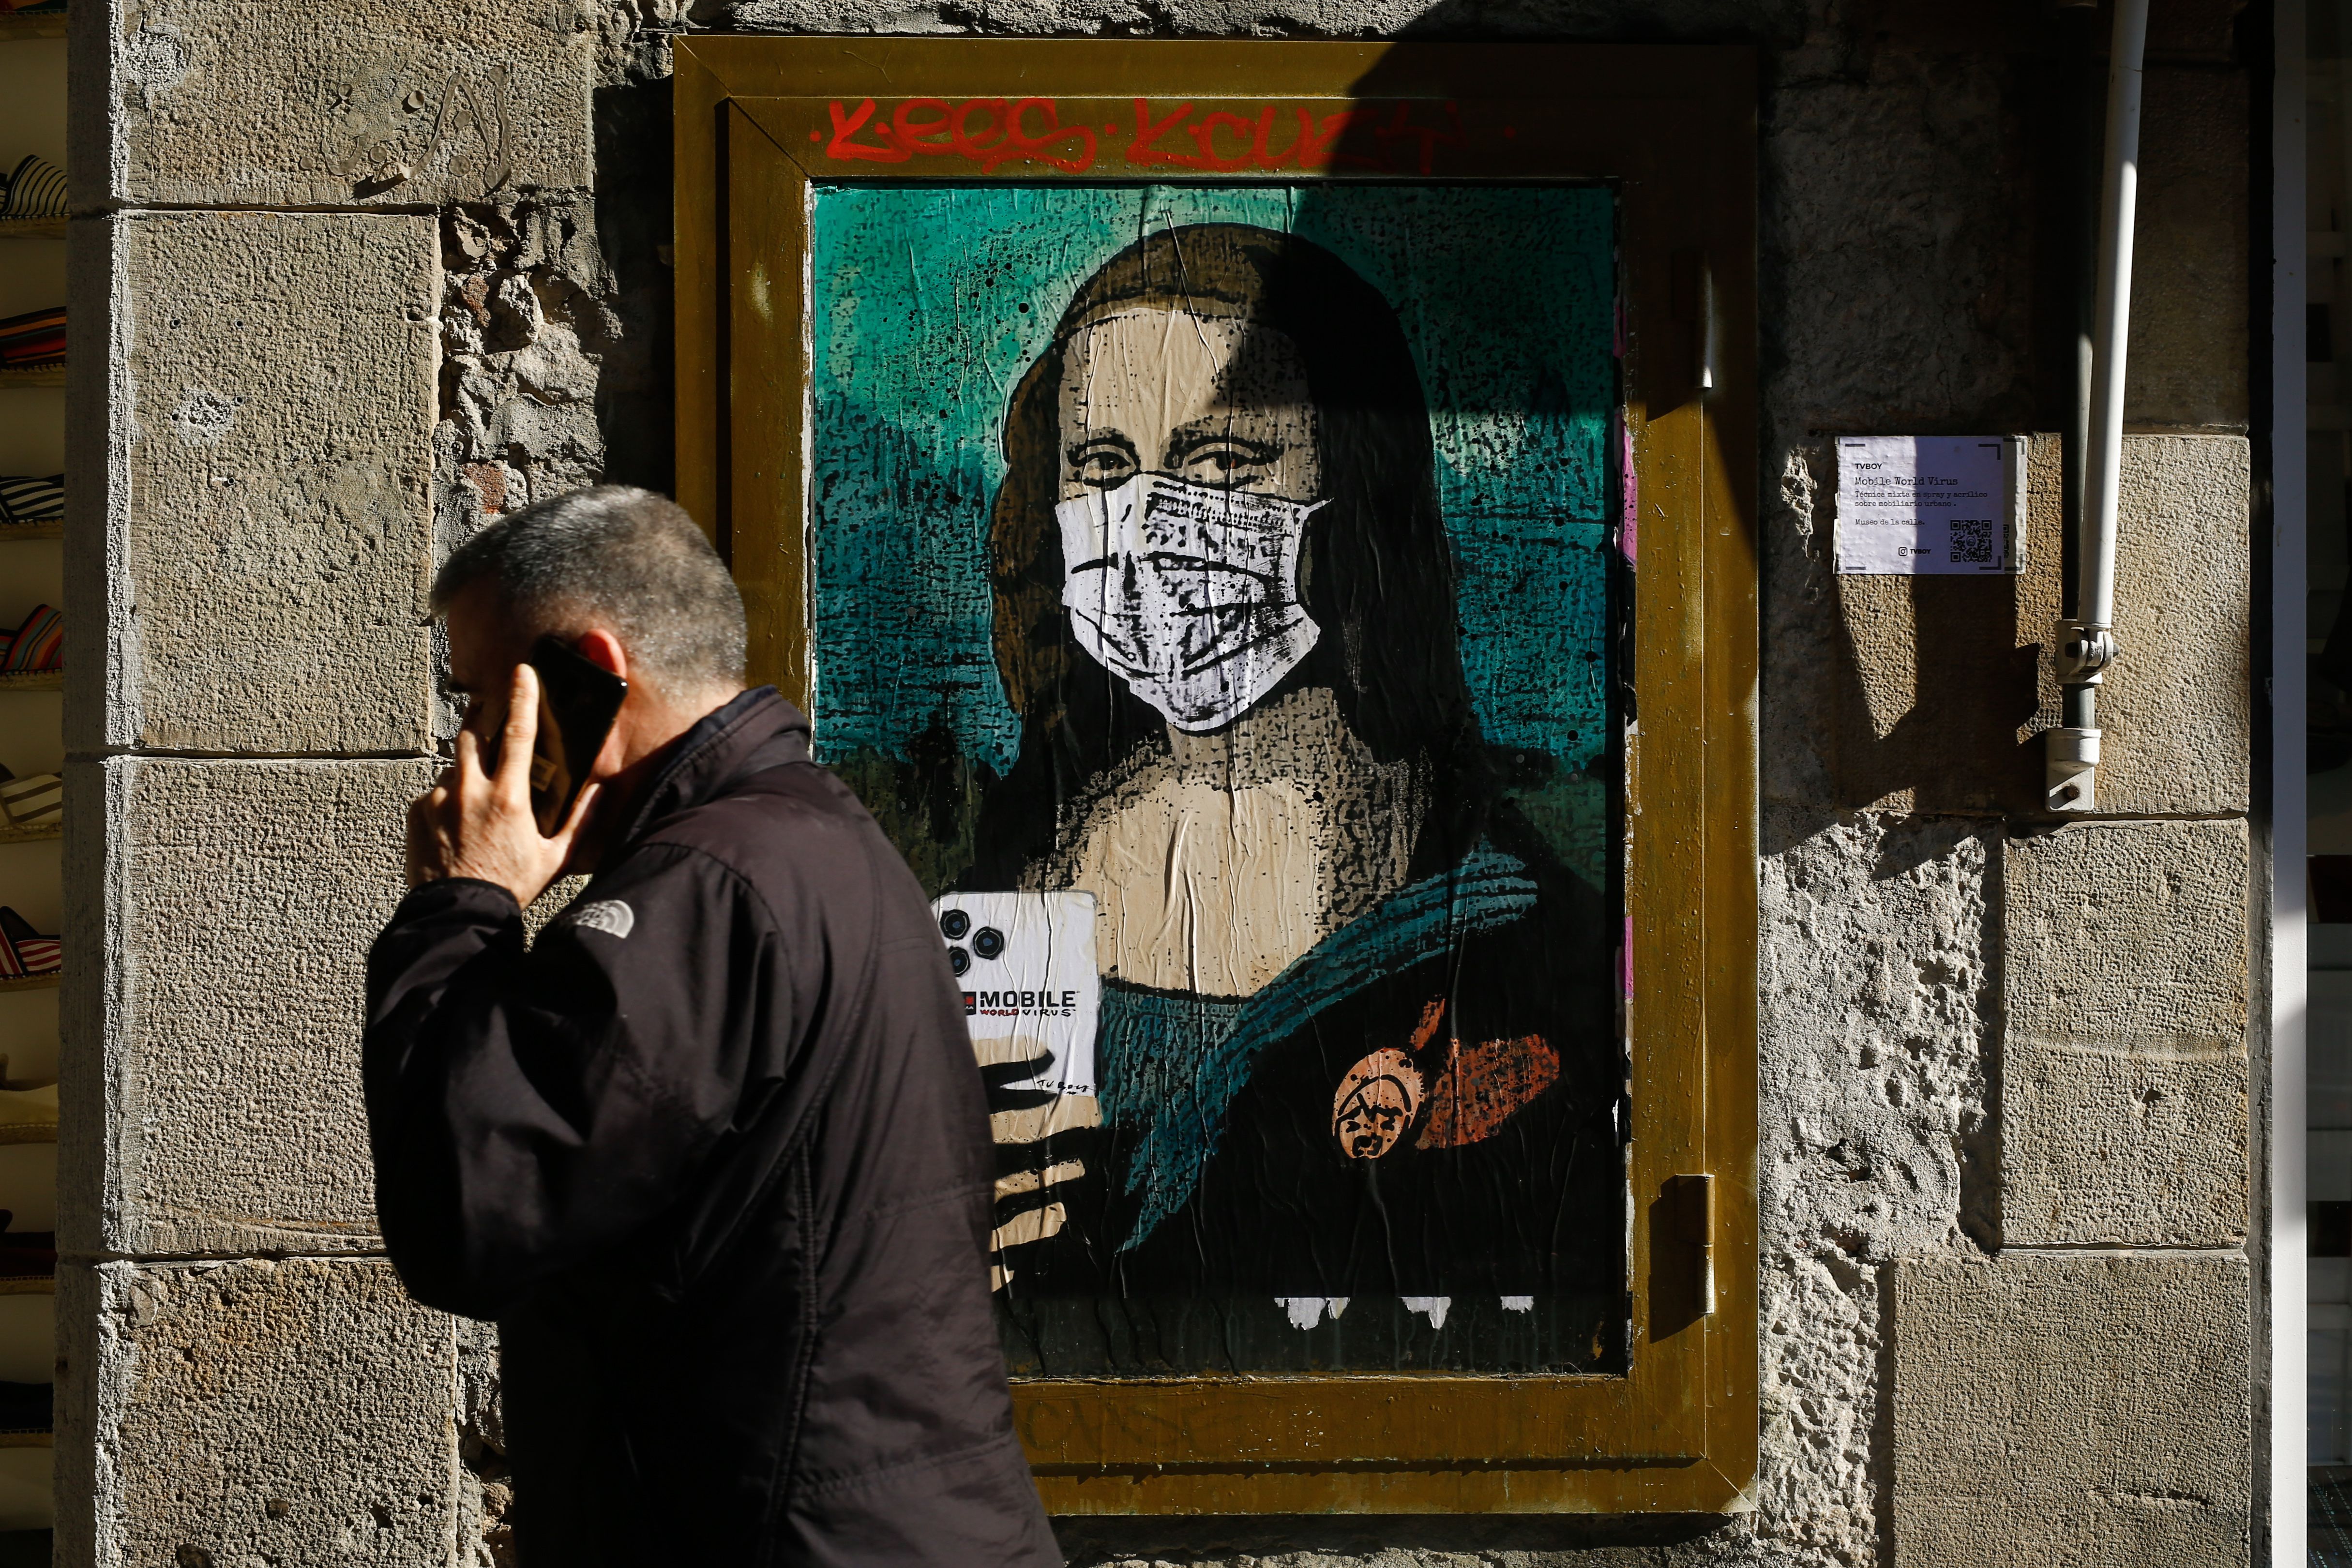 A man holding his mobile phone walks past a poster by Italian urban artist Salvatore Benintende aka "TVBOY" depecting Leonardo da Vinci's Mona Lisa wearing a protective facemask and holding a mobile phone reading "Mobile World Virus" in a street of Barcelona on February 18, 2020, a week after the World Mobile Congress was cancelled due to fears stemming from the coronavirus that sparked an exodus of industry heavyweights. (Photo by PAU BARRENA/AFP via Getty Images)